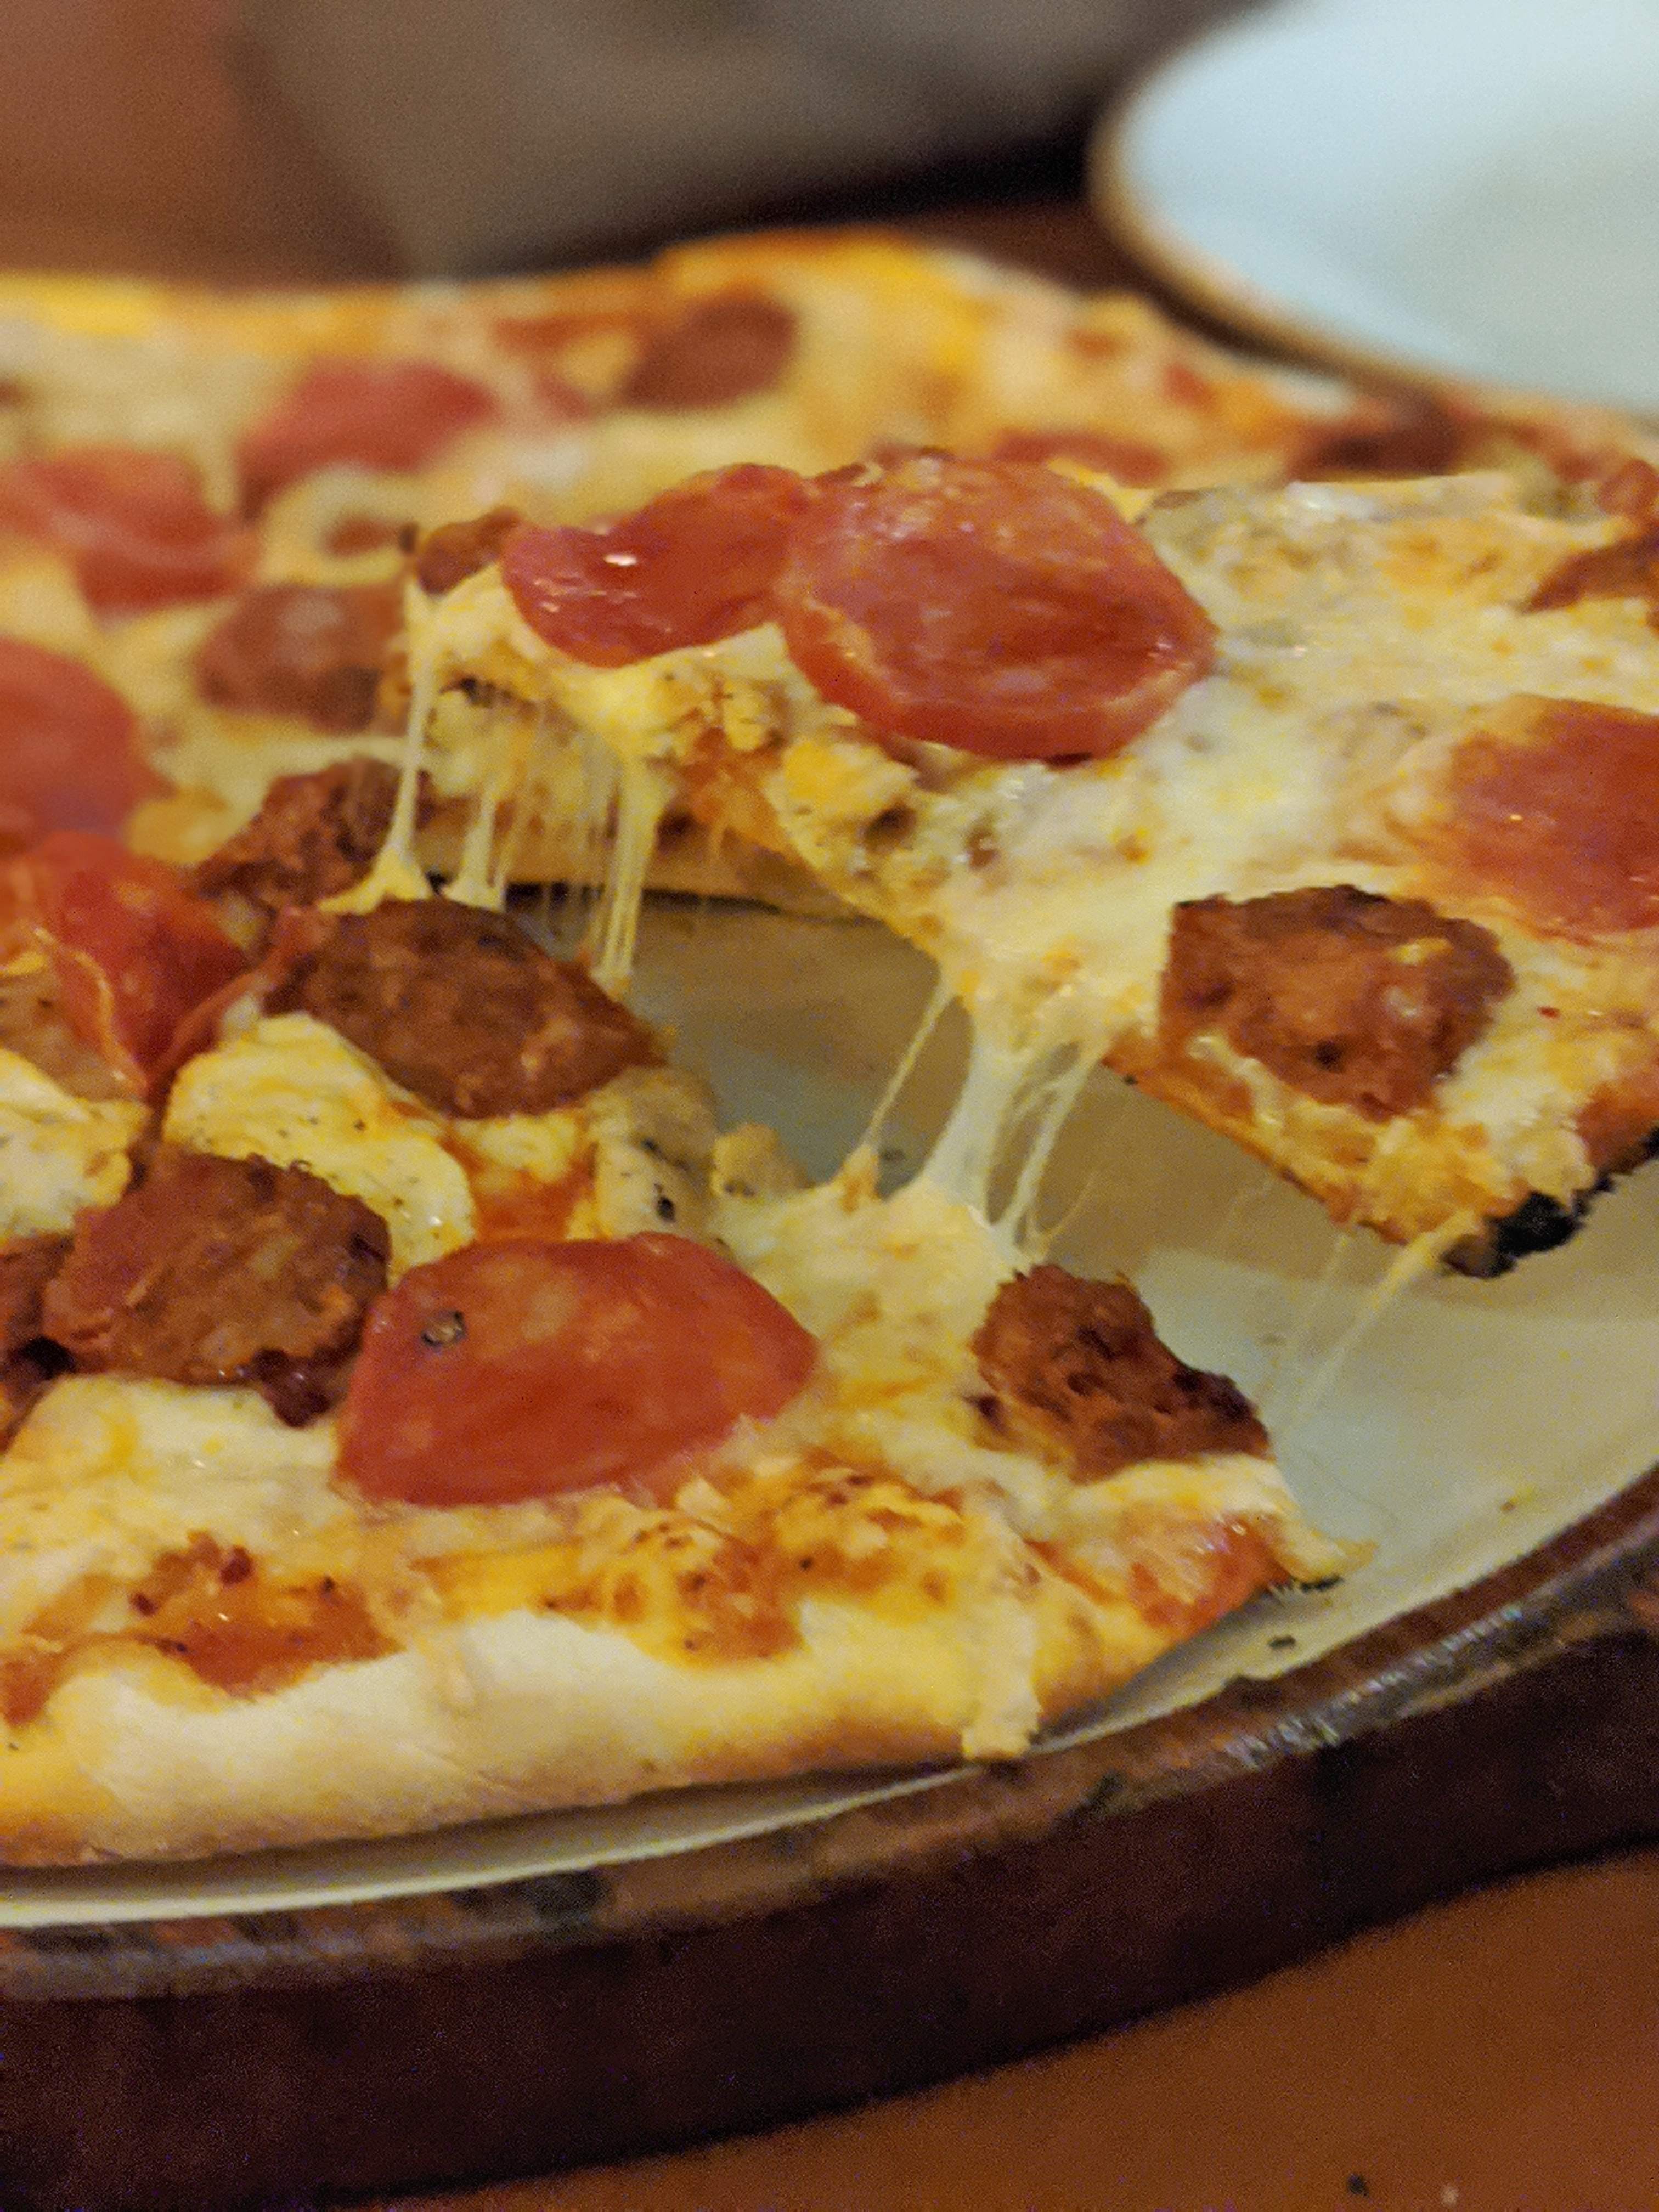 Dish,Food,Cuisine,Pizza,Pizza cheese,Pepperoni,California-style pizza,Ingredient,Junk food,Meat